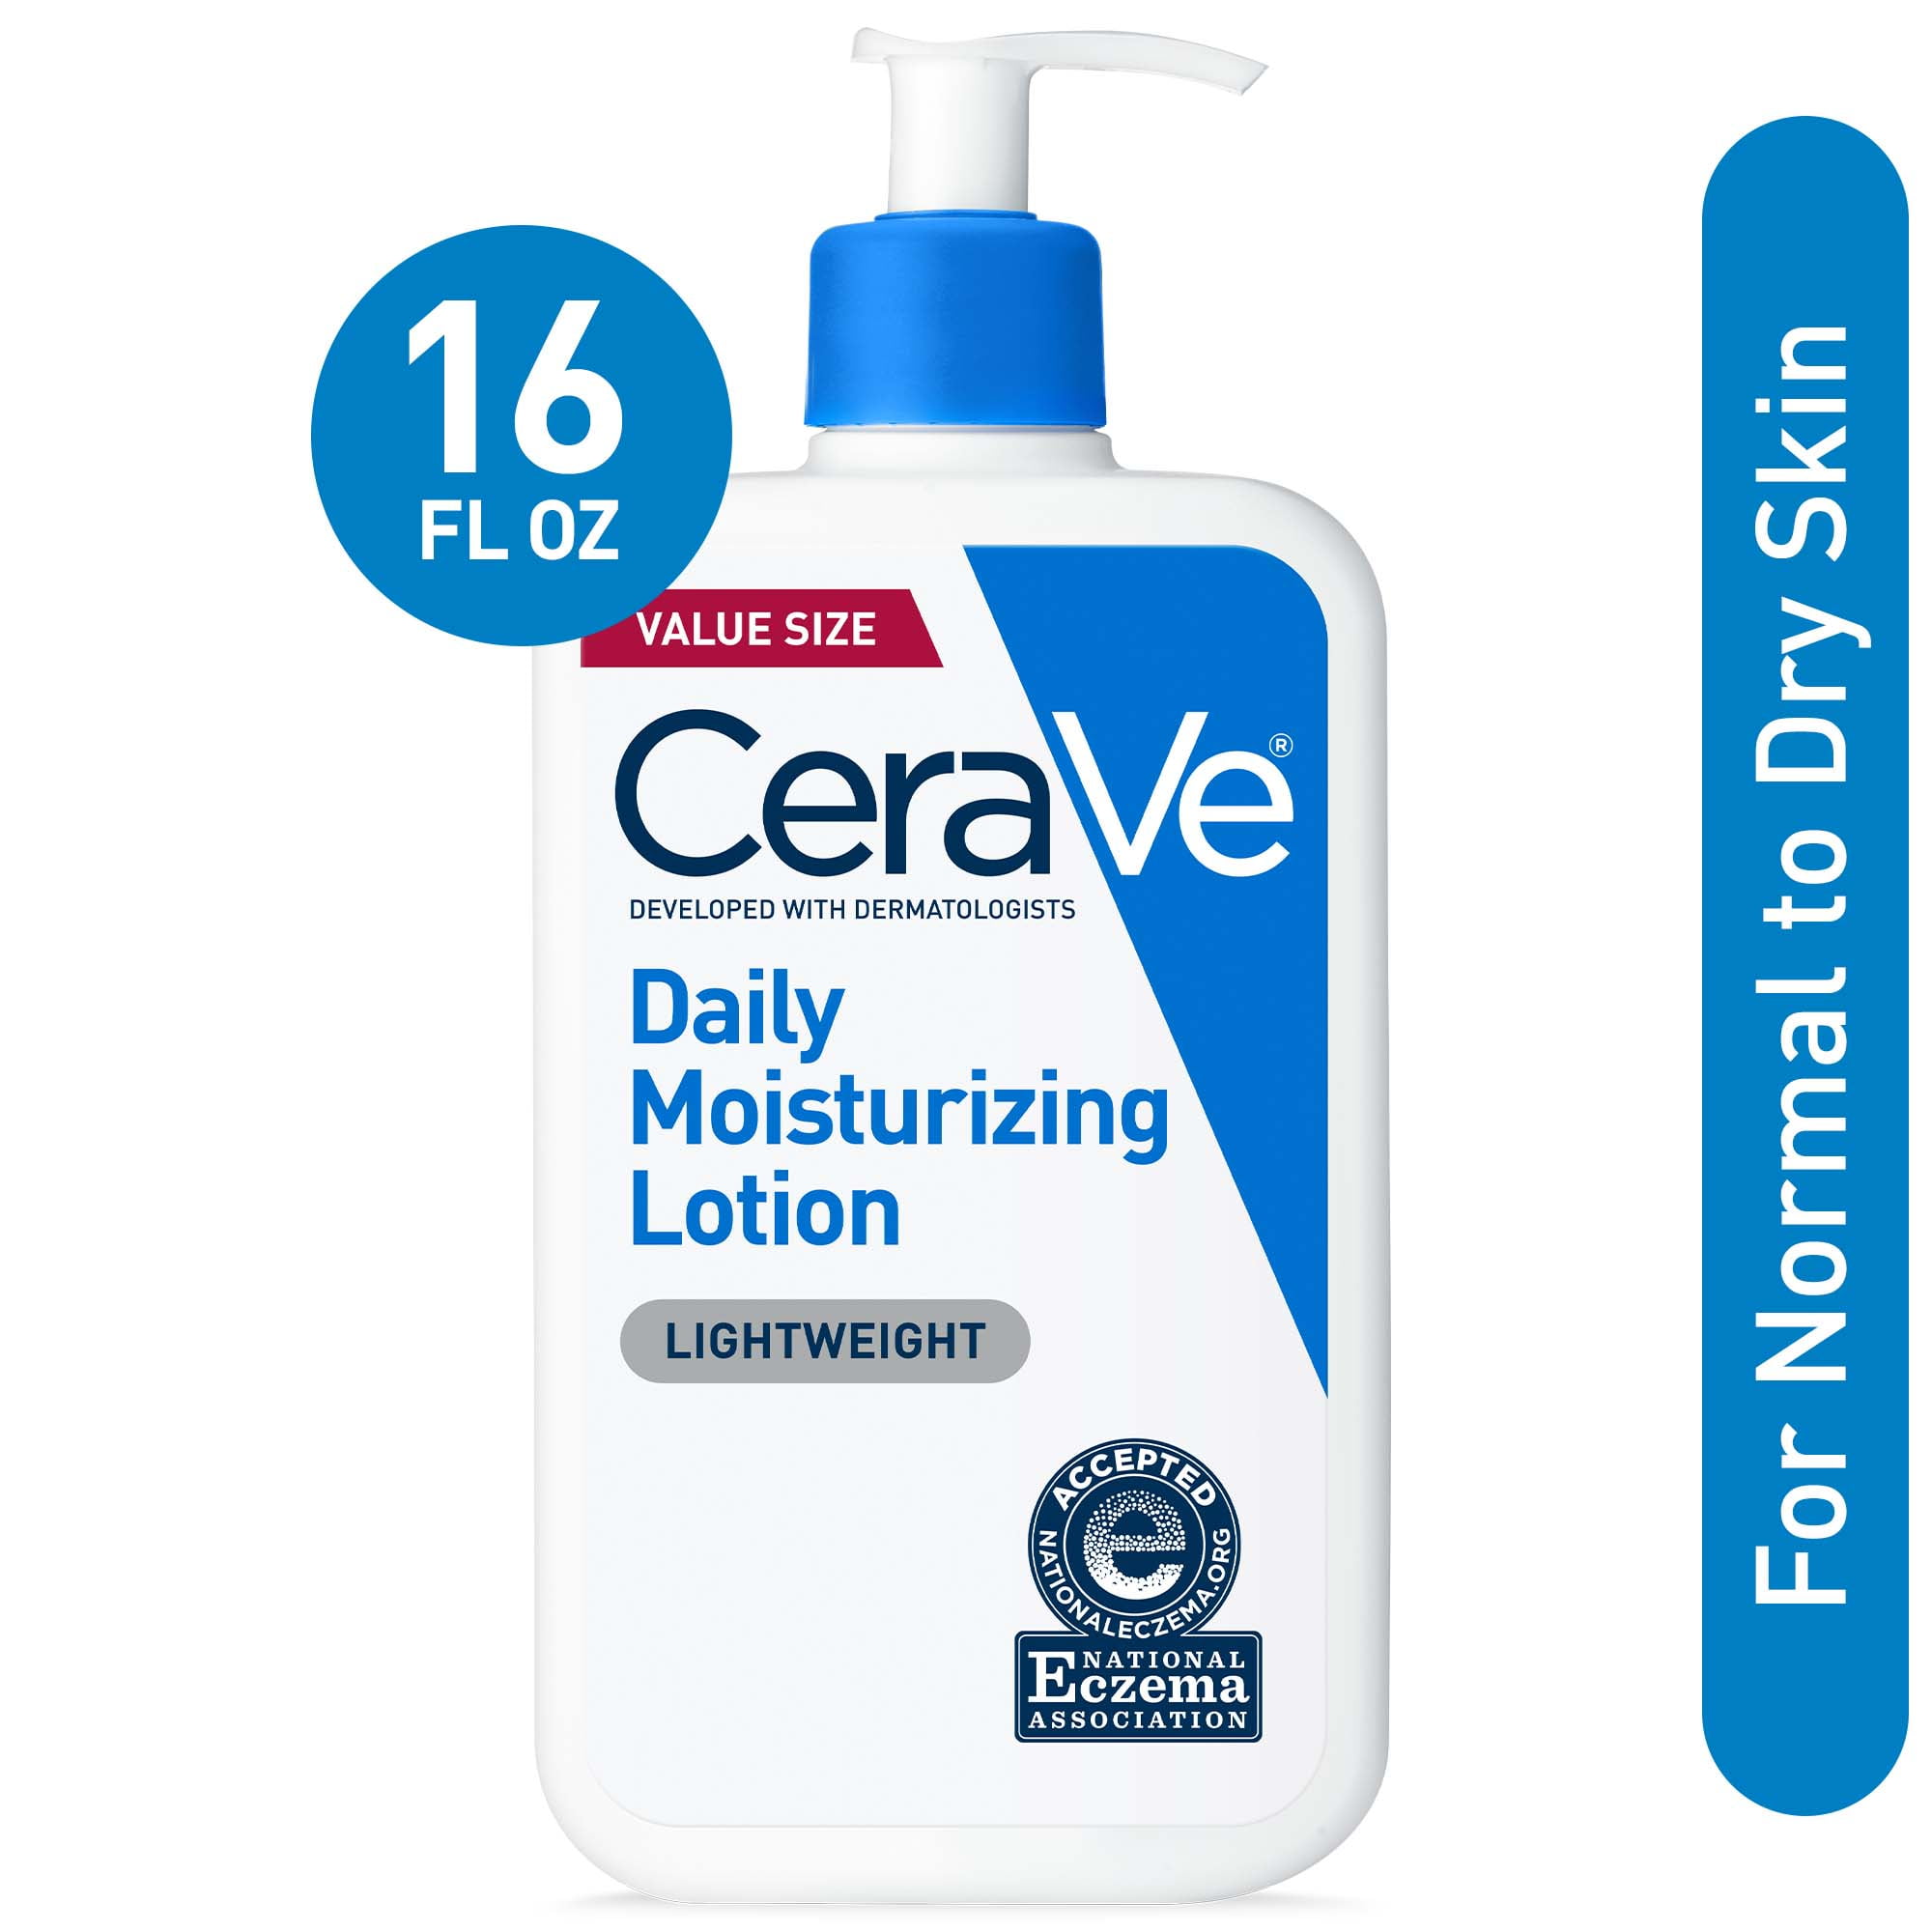 CeraVe Daily Moisturizing Lotion for Normal to Dry Skin, 16 fl oz